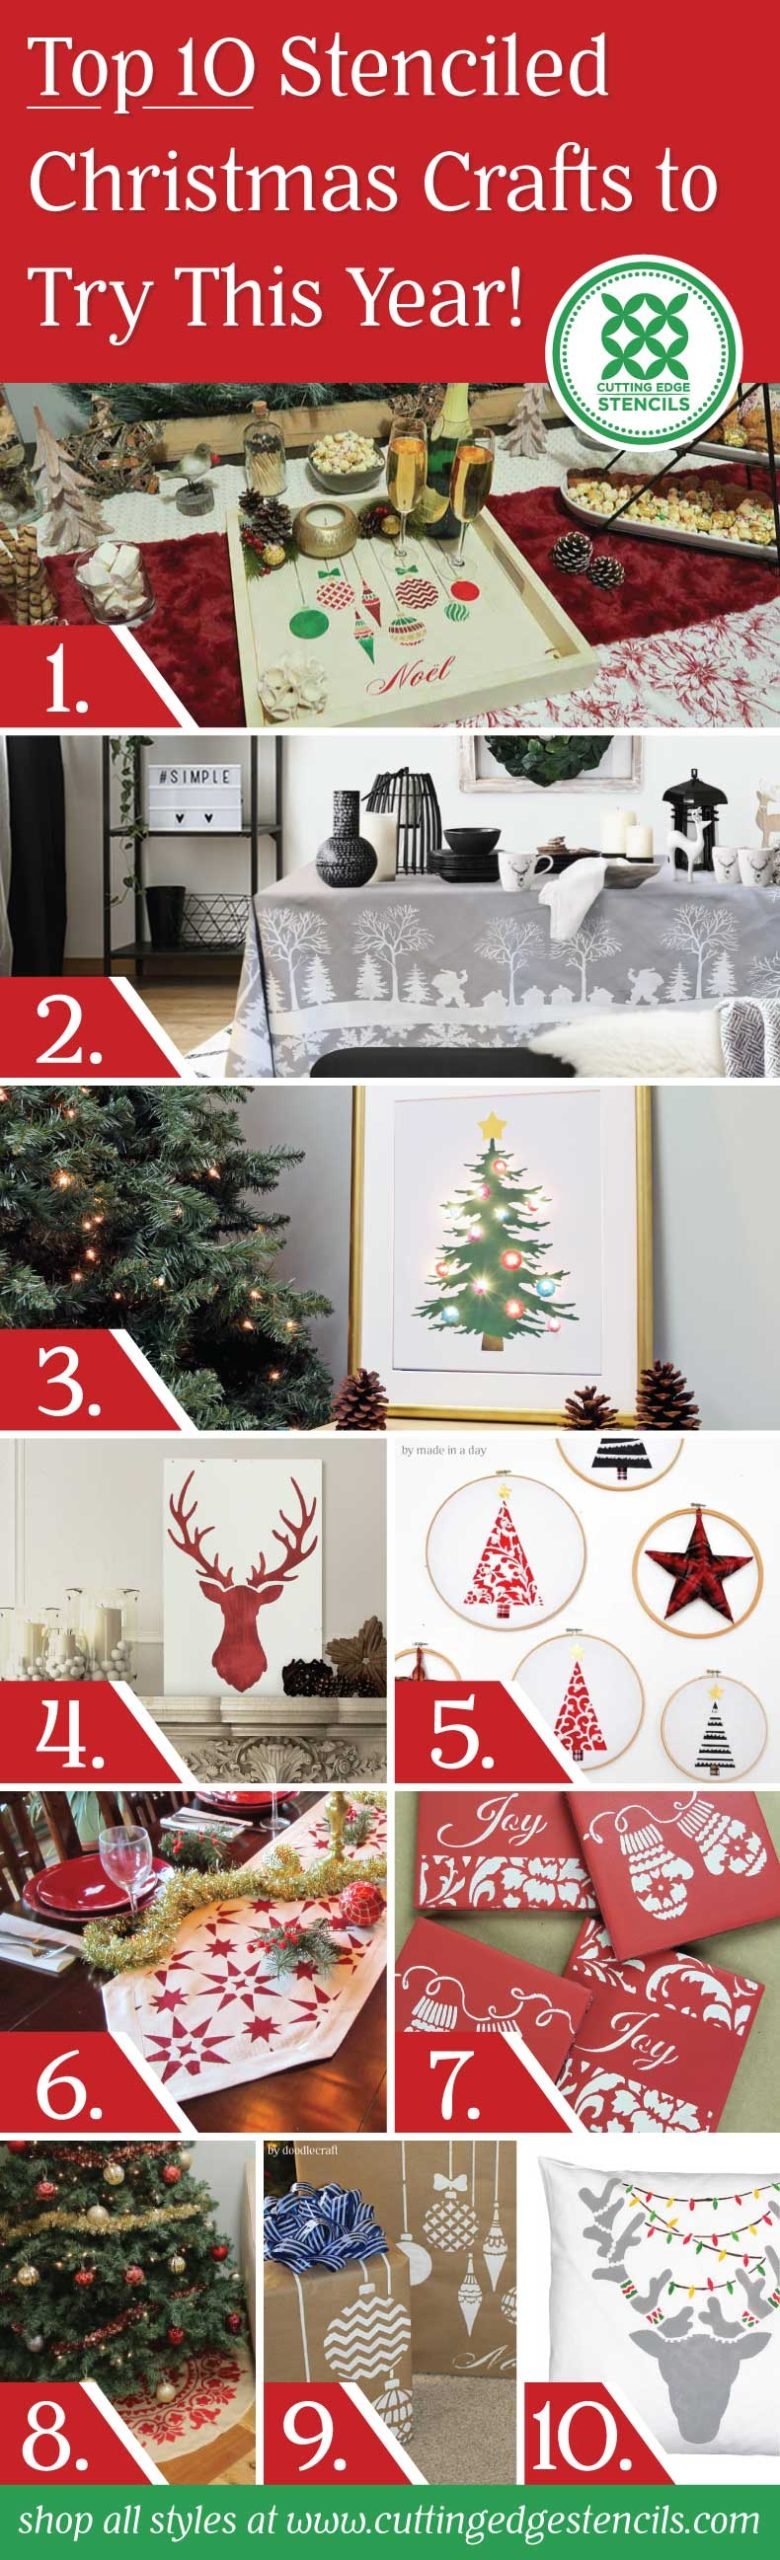 top stencil crafts to try this year